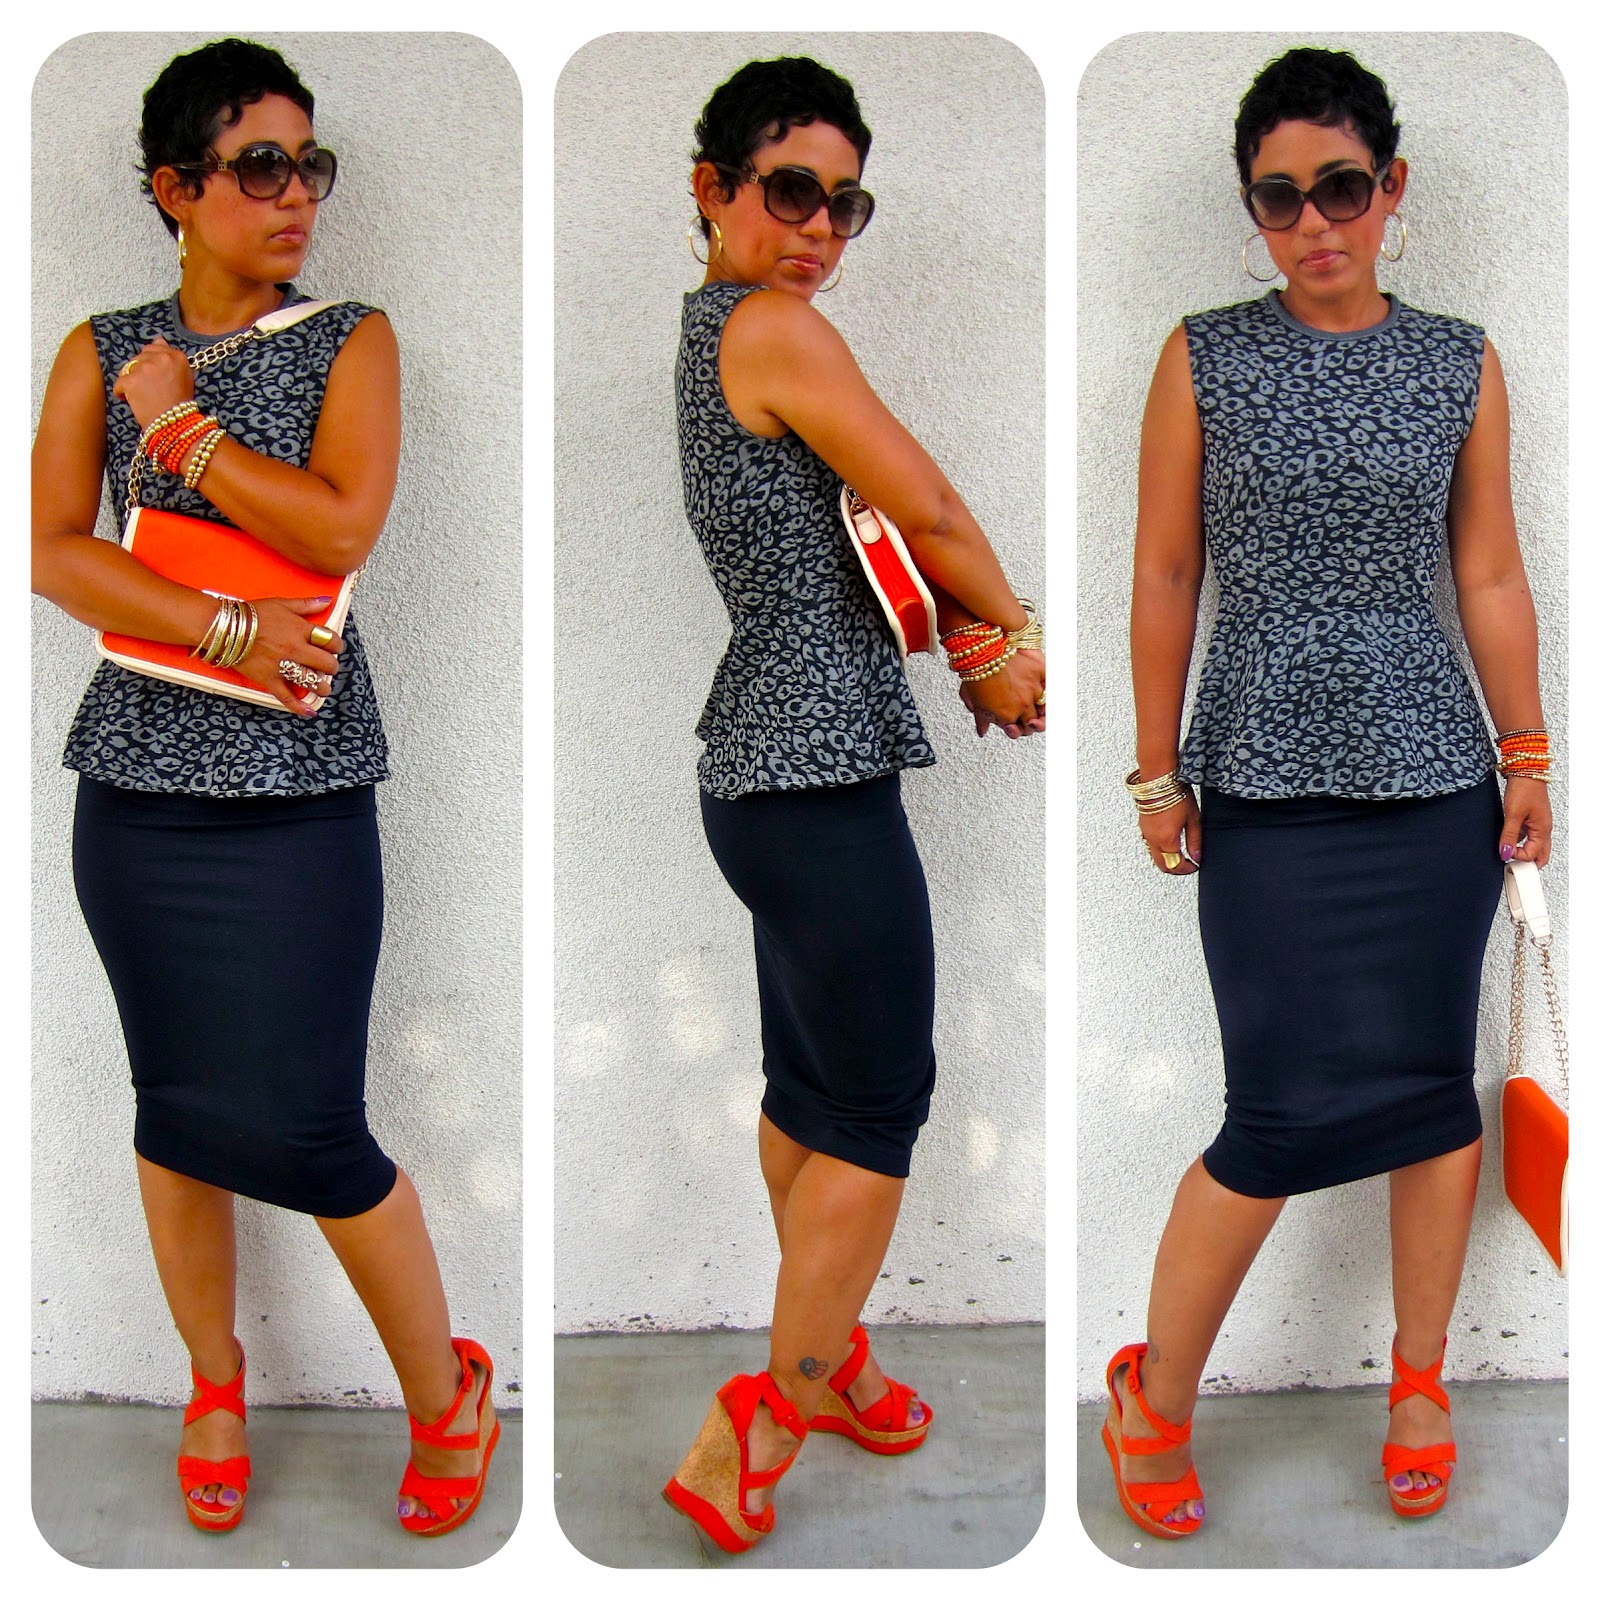 DIY Peplum Top + Pencil Skirt + Pattern Review Vogue 8815 |Fashion, Lifestyle, and DIY